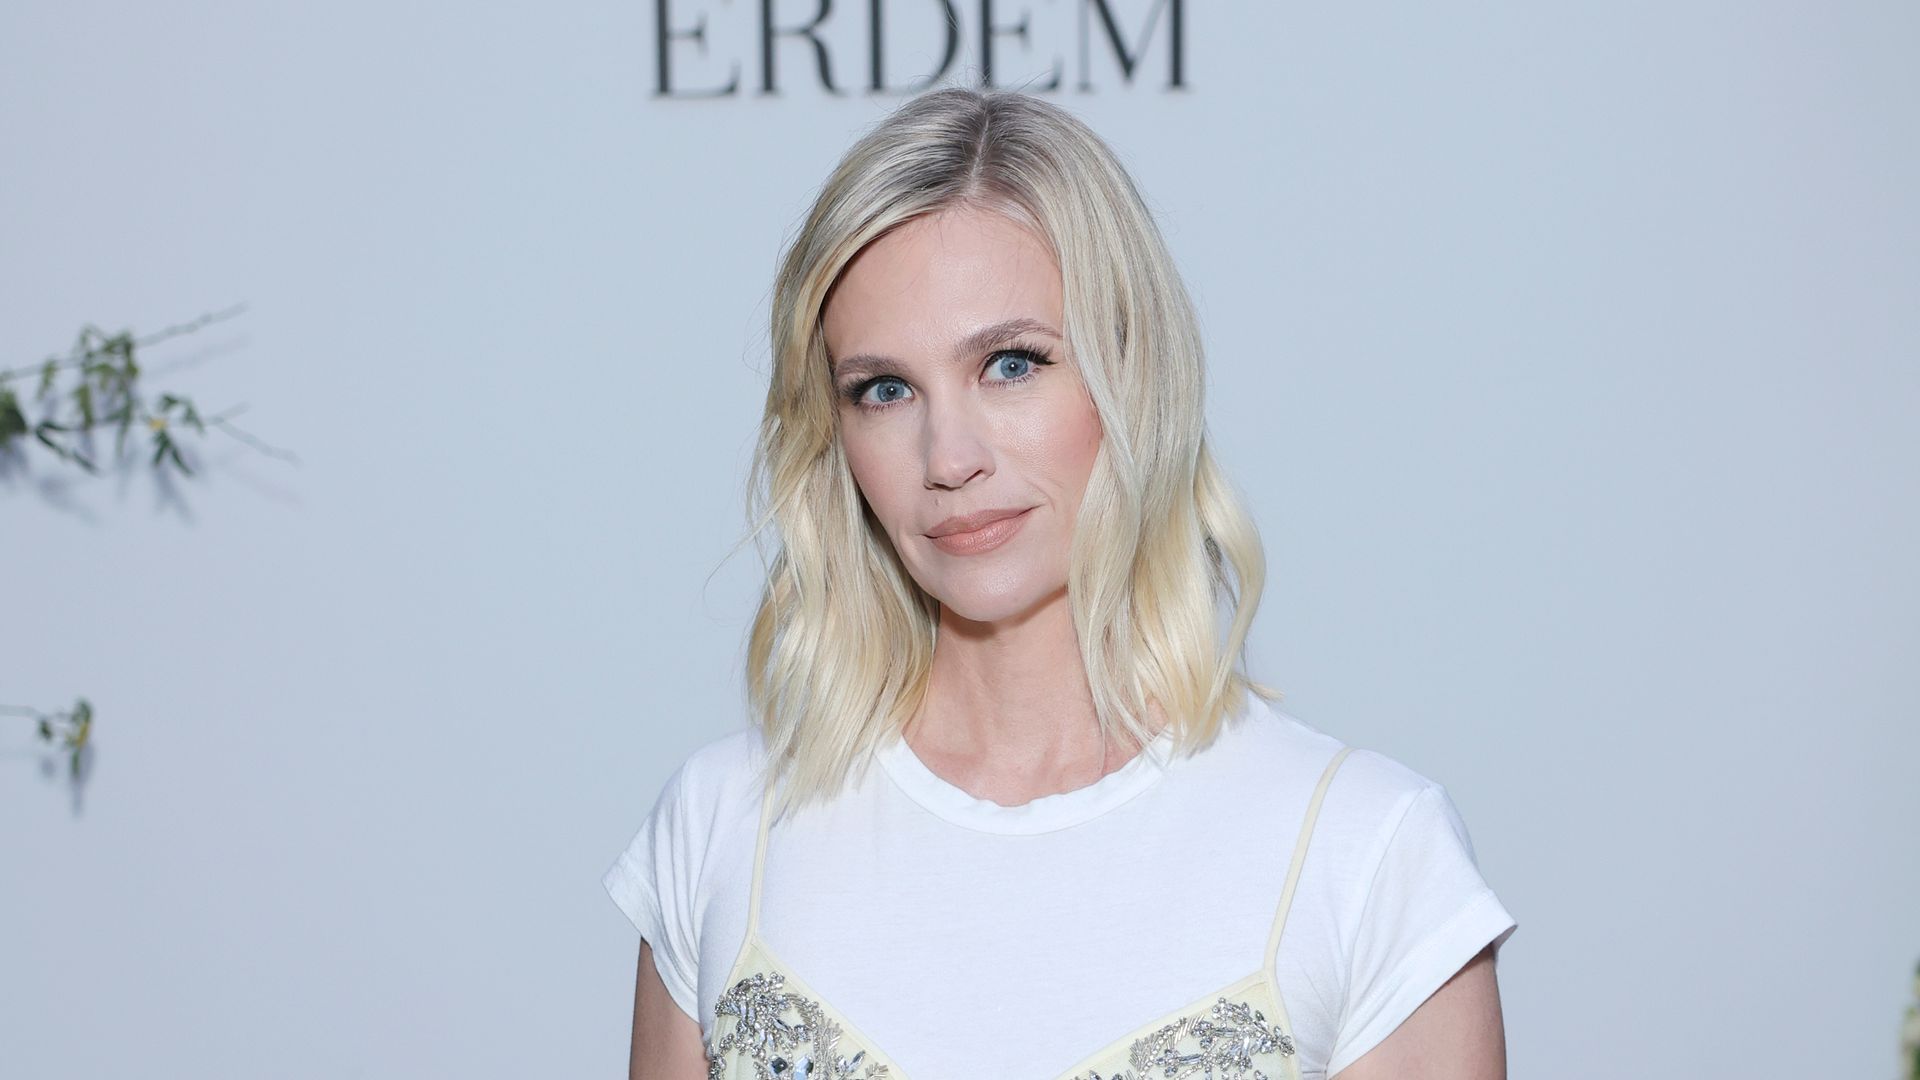 January Jones shares rare glimpse of son Xander with her appearance transformation